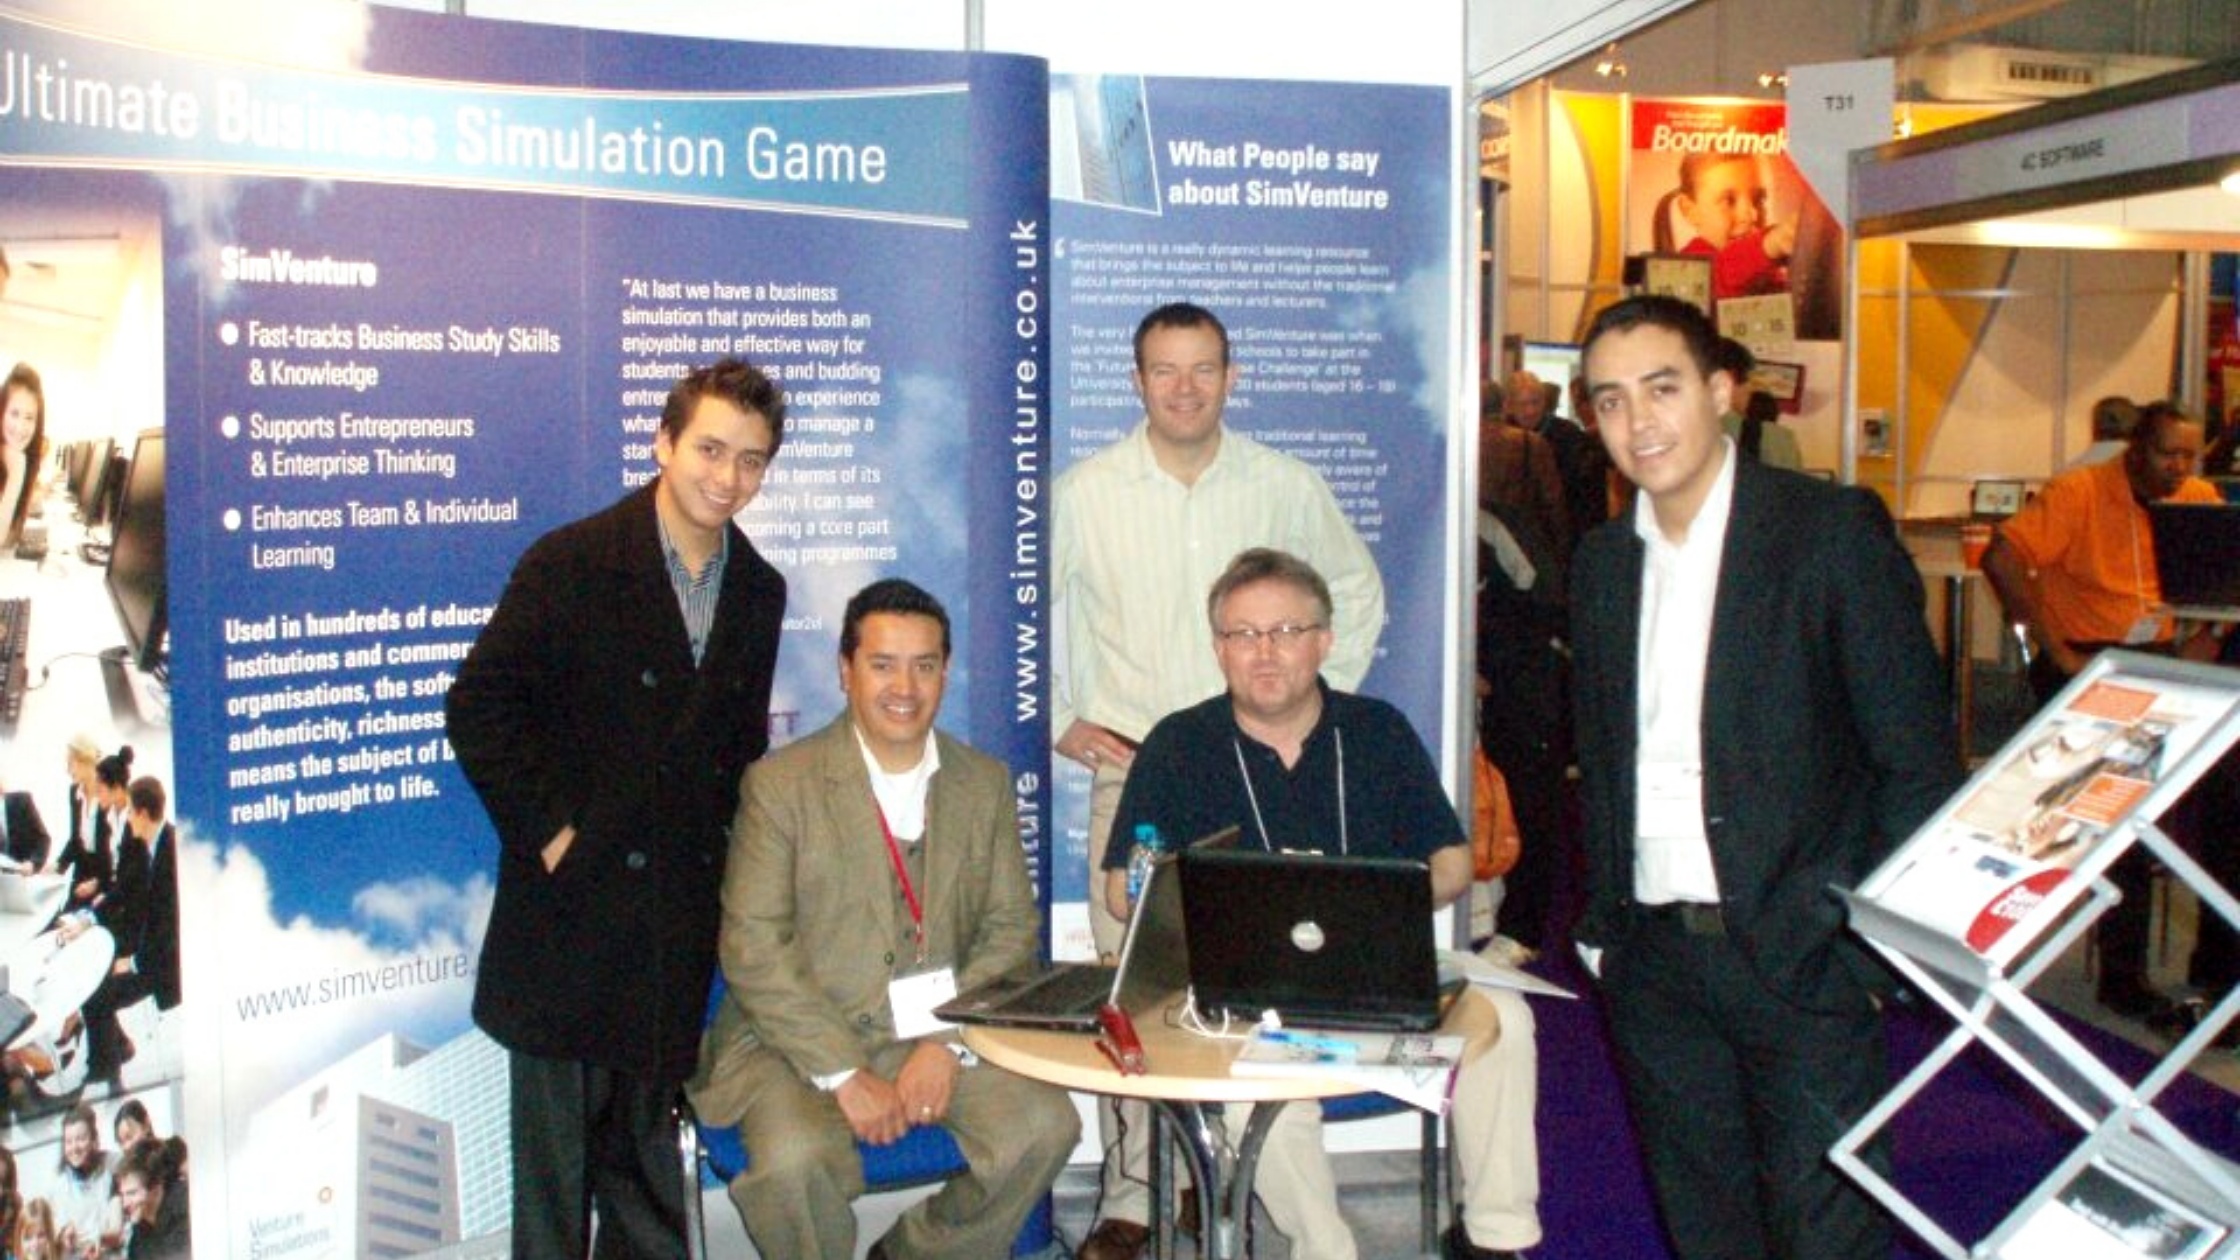 SimVenture Partner Agent in Mexico: Alan and Abraham from Simulardores On Line meeting SimVenture Directors Paul and Peter in London at Bett 2011.